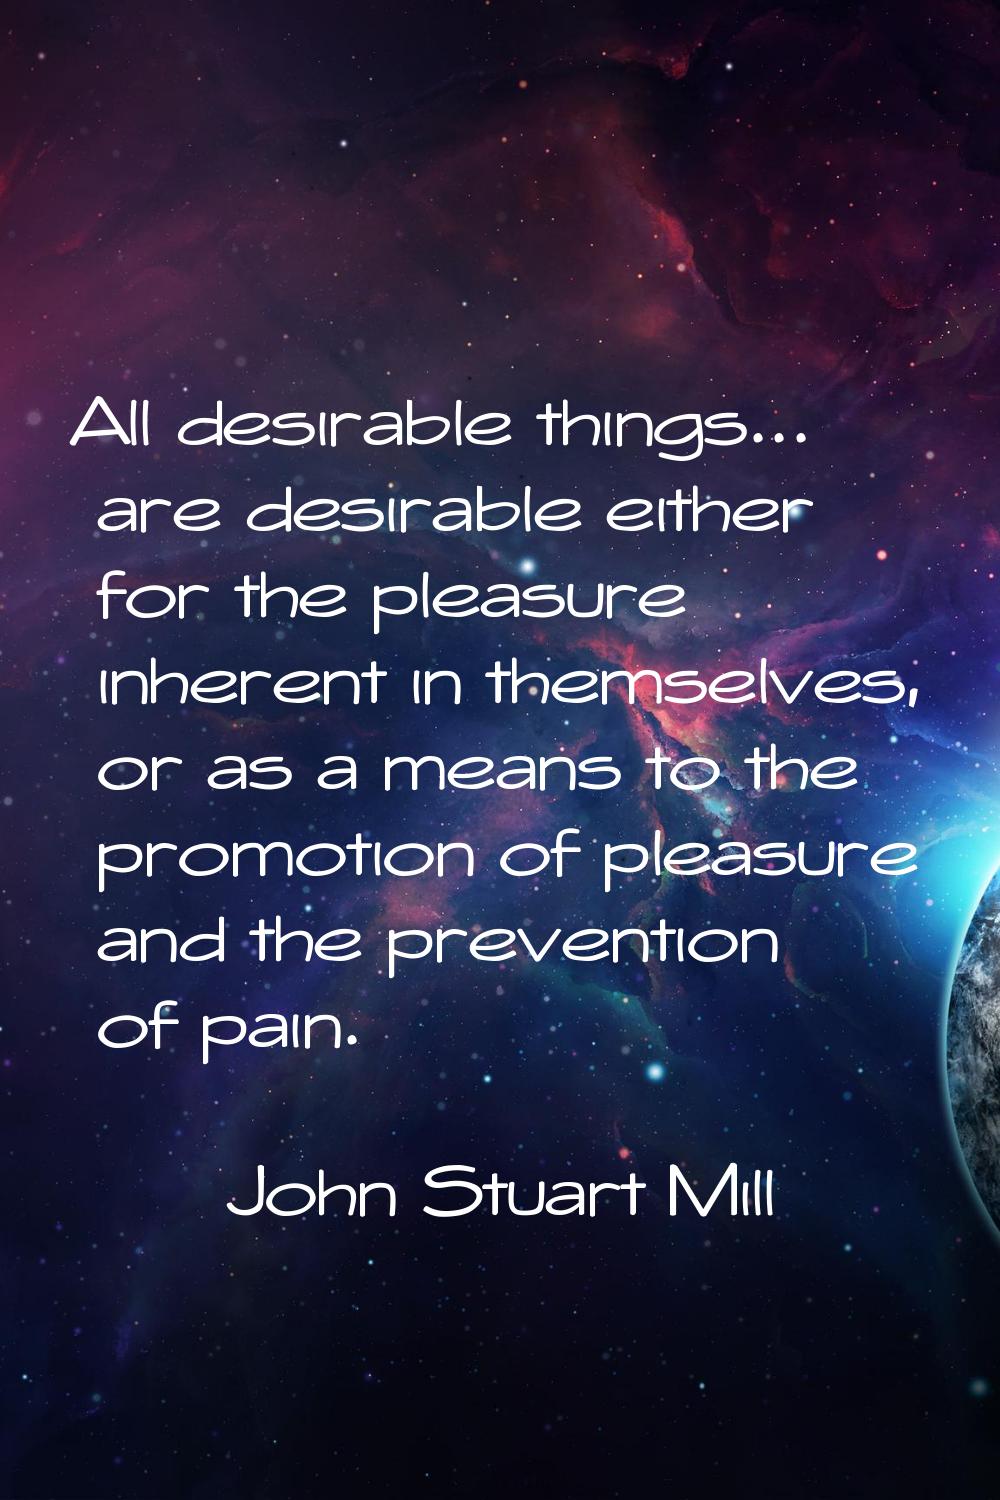 All desirable things... are desirable either for the pleasure inherent in themselves, or as a means